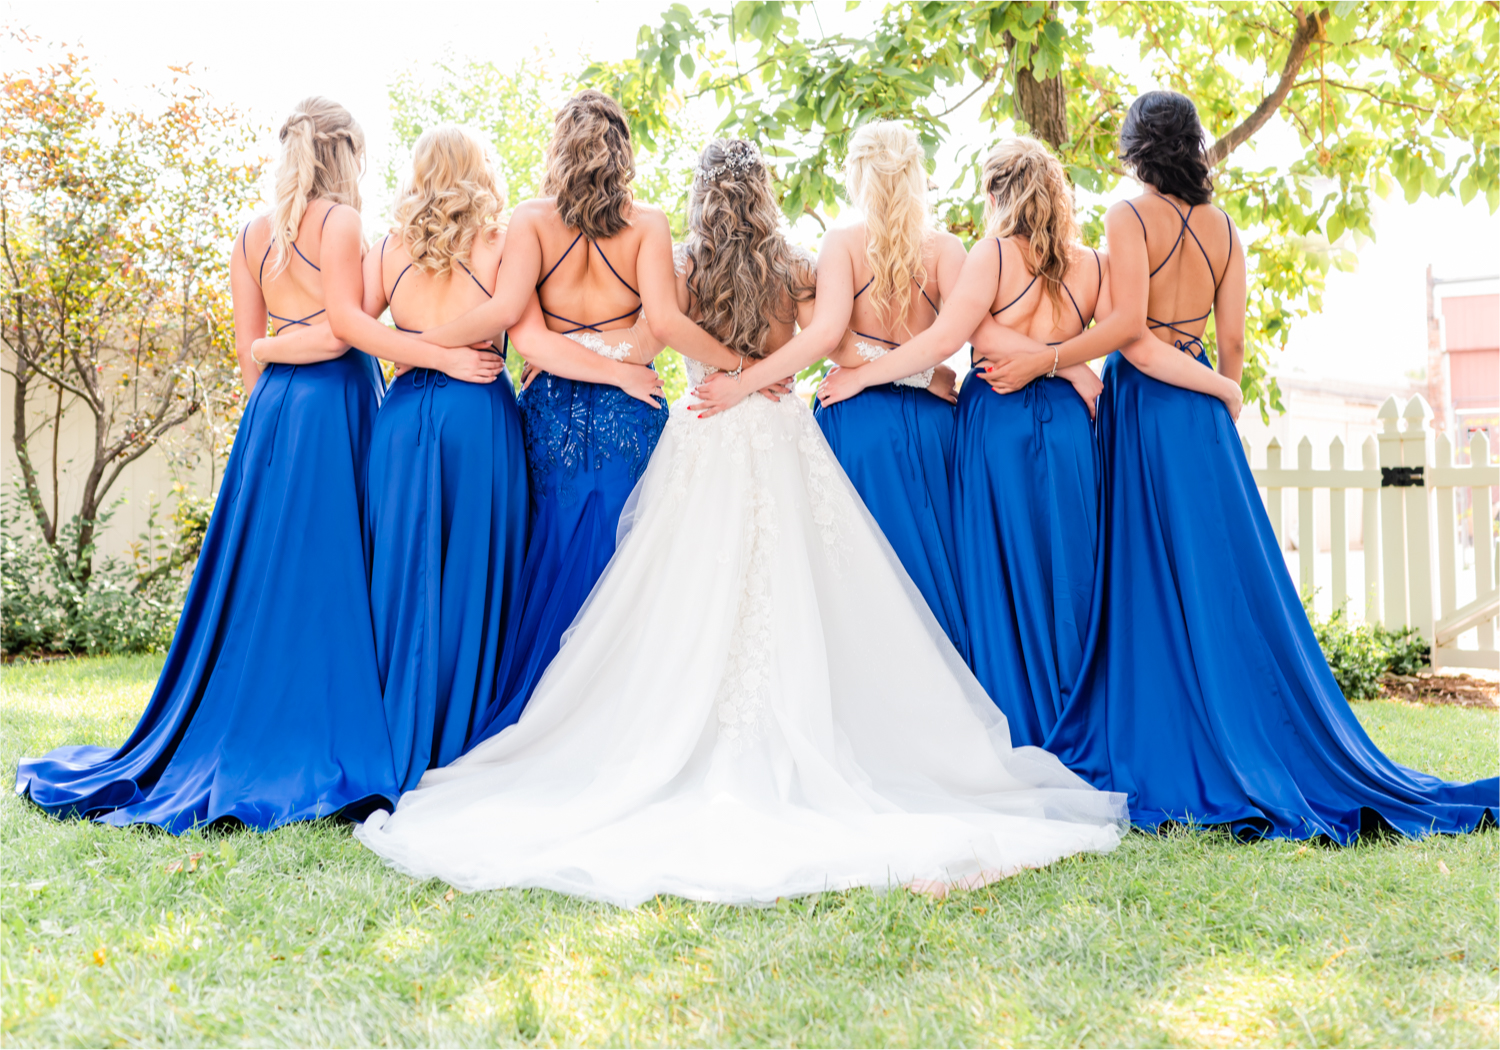 Romantic and Rustic Wedding at The Mill in Windsor | Britni Girard Photography | Colorado based wedding photography and videography team | Royal Blue and White Bridesmaids